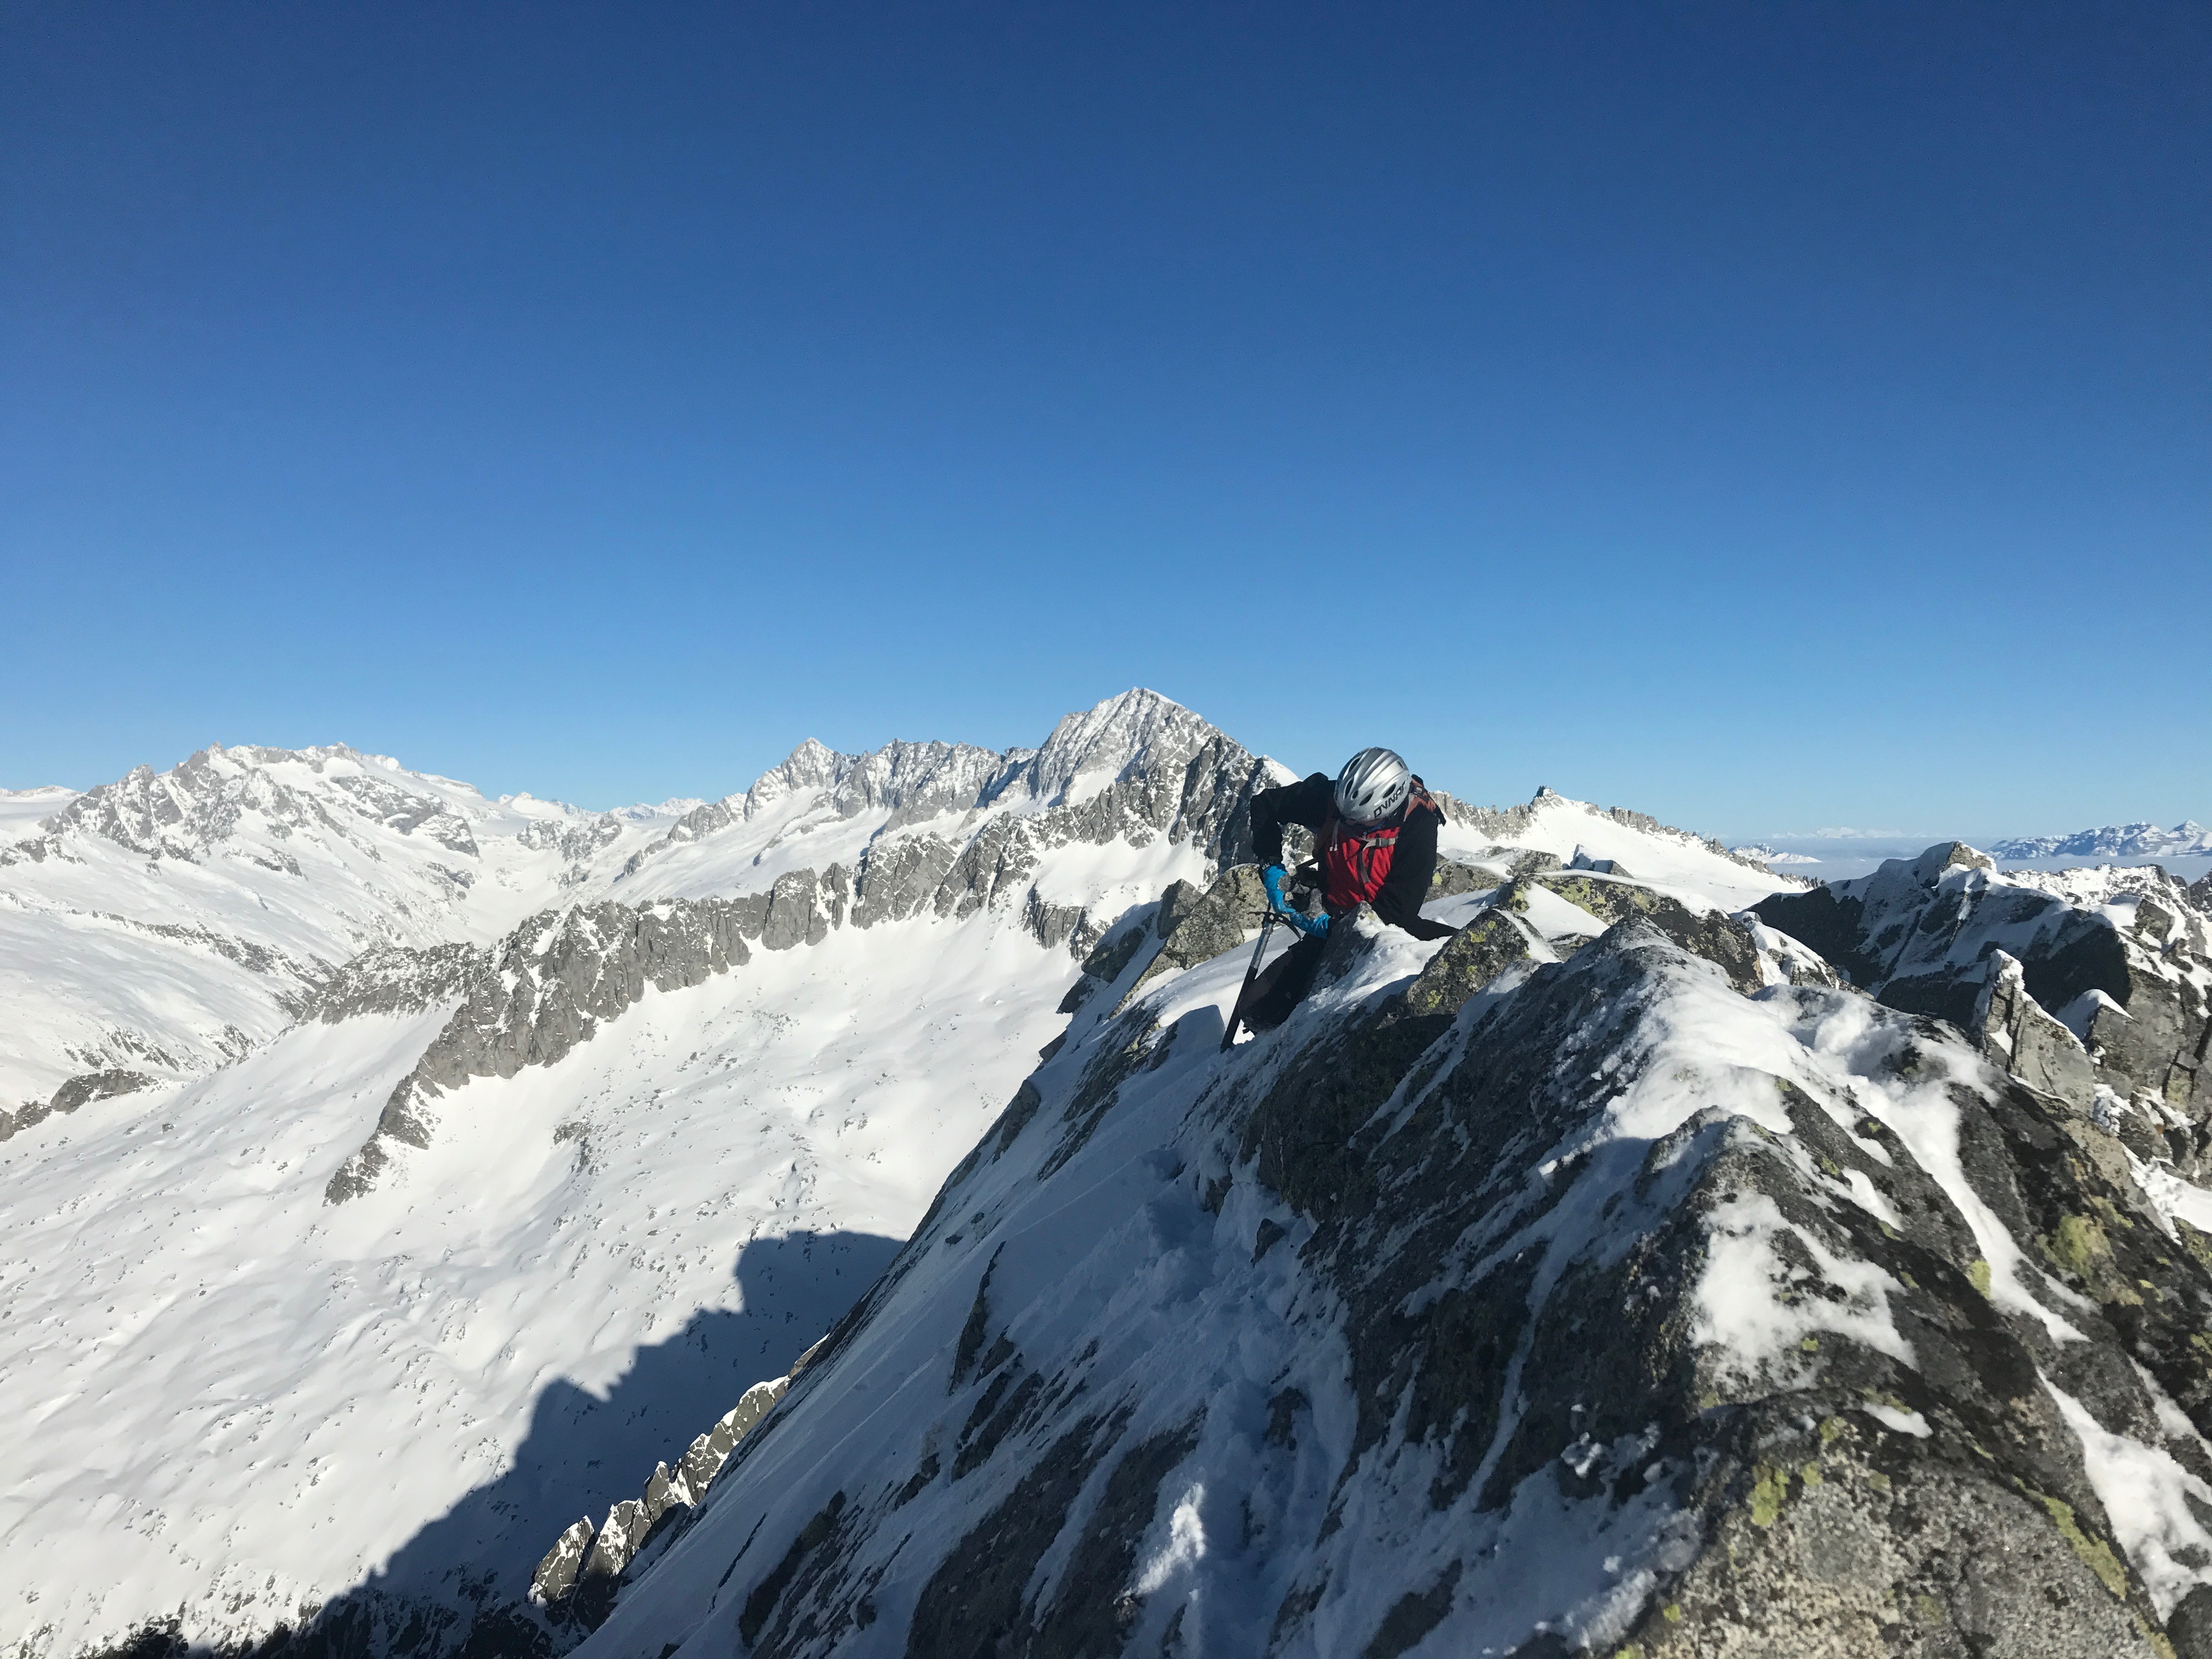 A person ski mountaiineering: climbing a ridge with the snowy mountains in the background